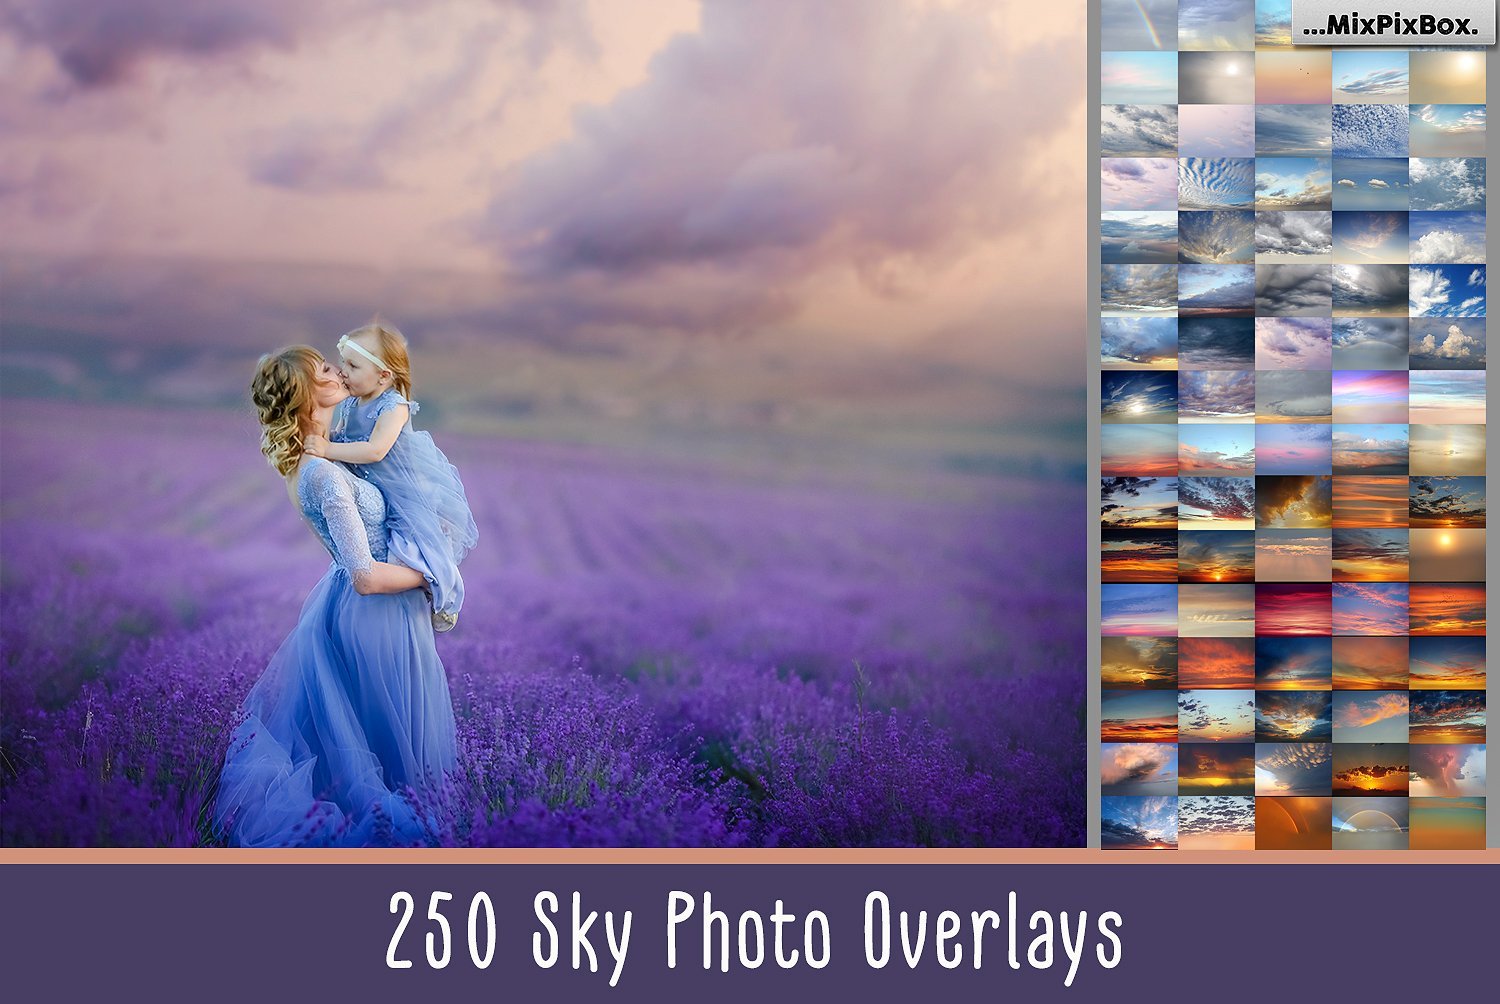 1000 Sky Overlays Packpreview image.